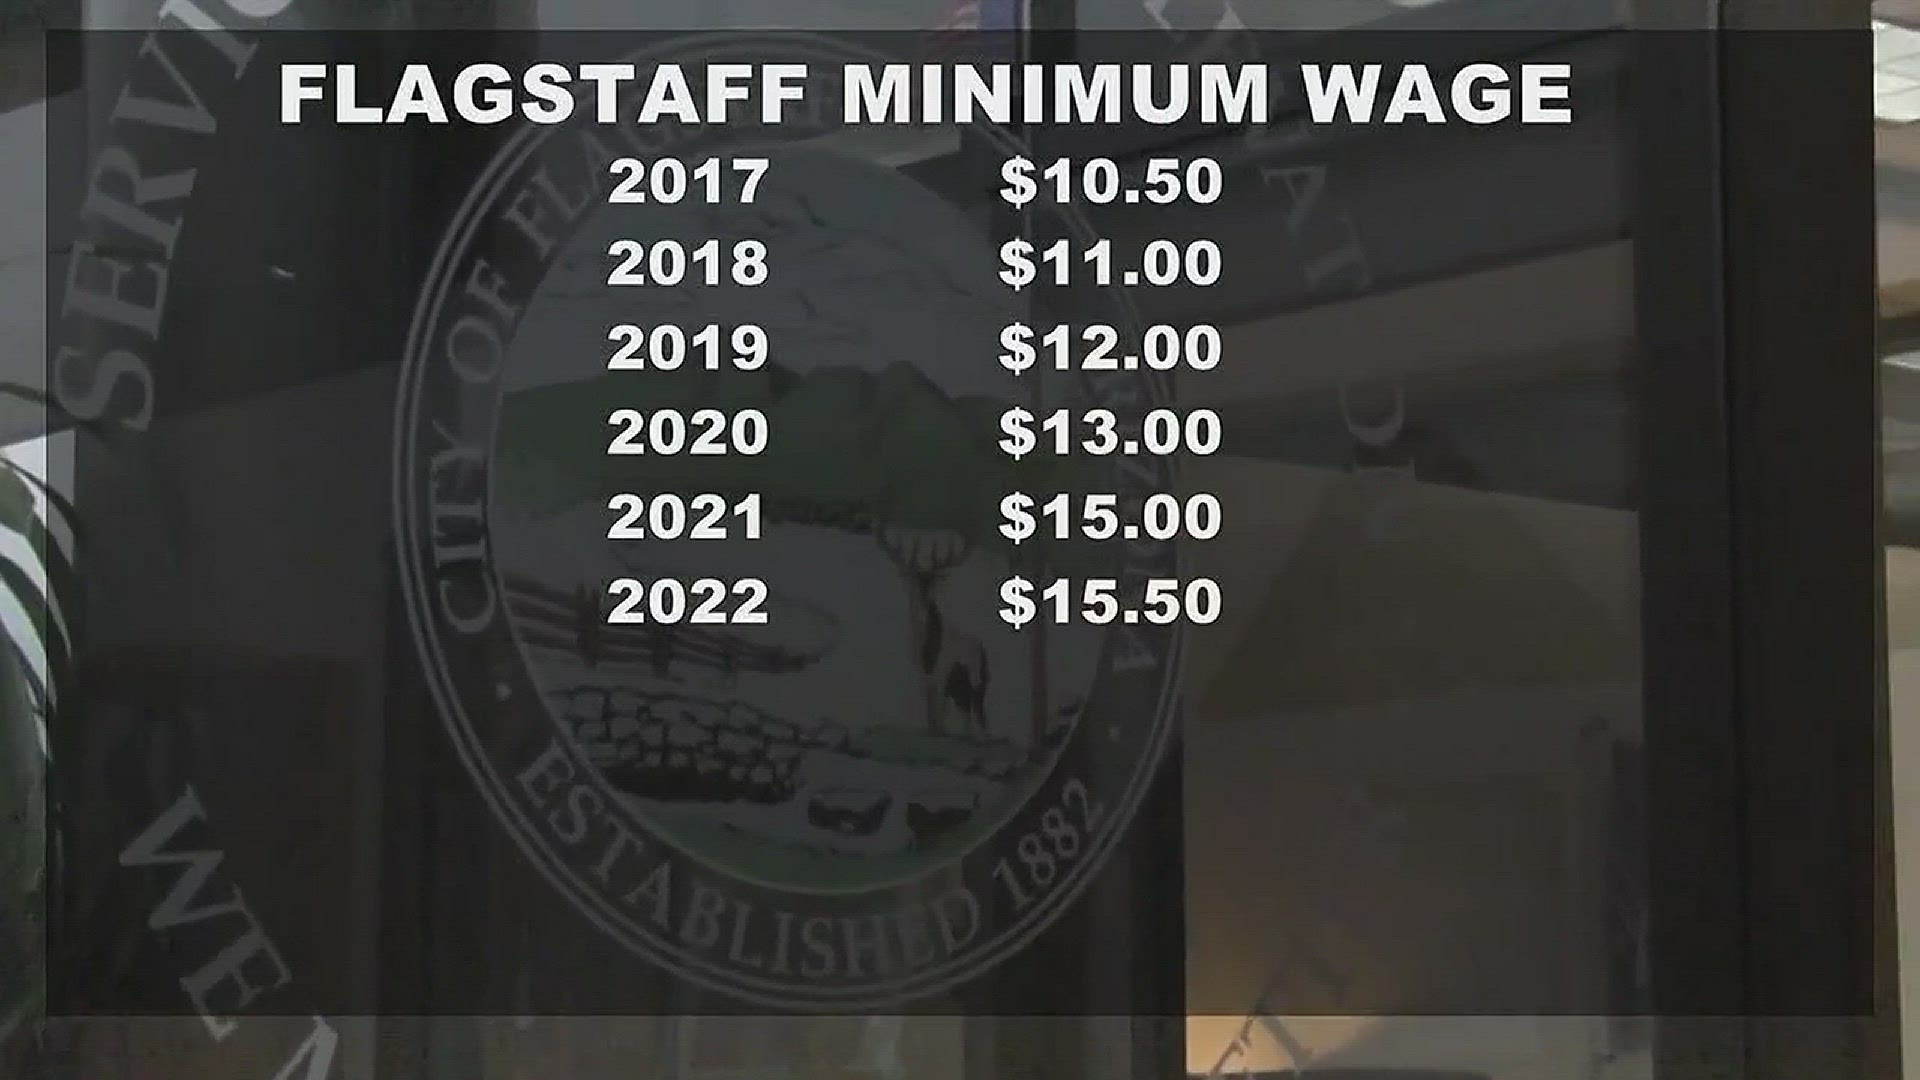 With a new minimum wage set to start in July, they city hired someone to help both employers and their workers understand the new wage law.